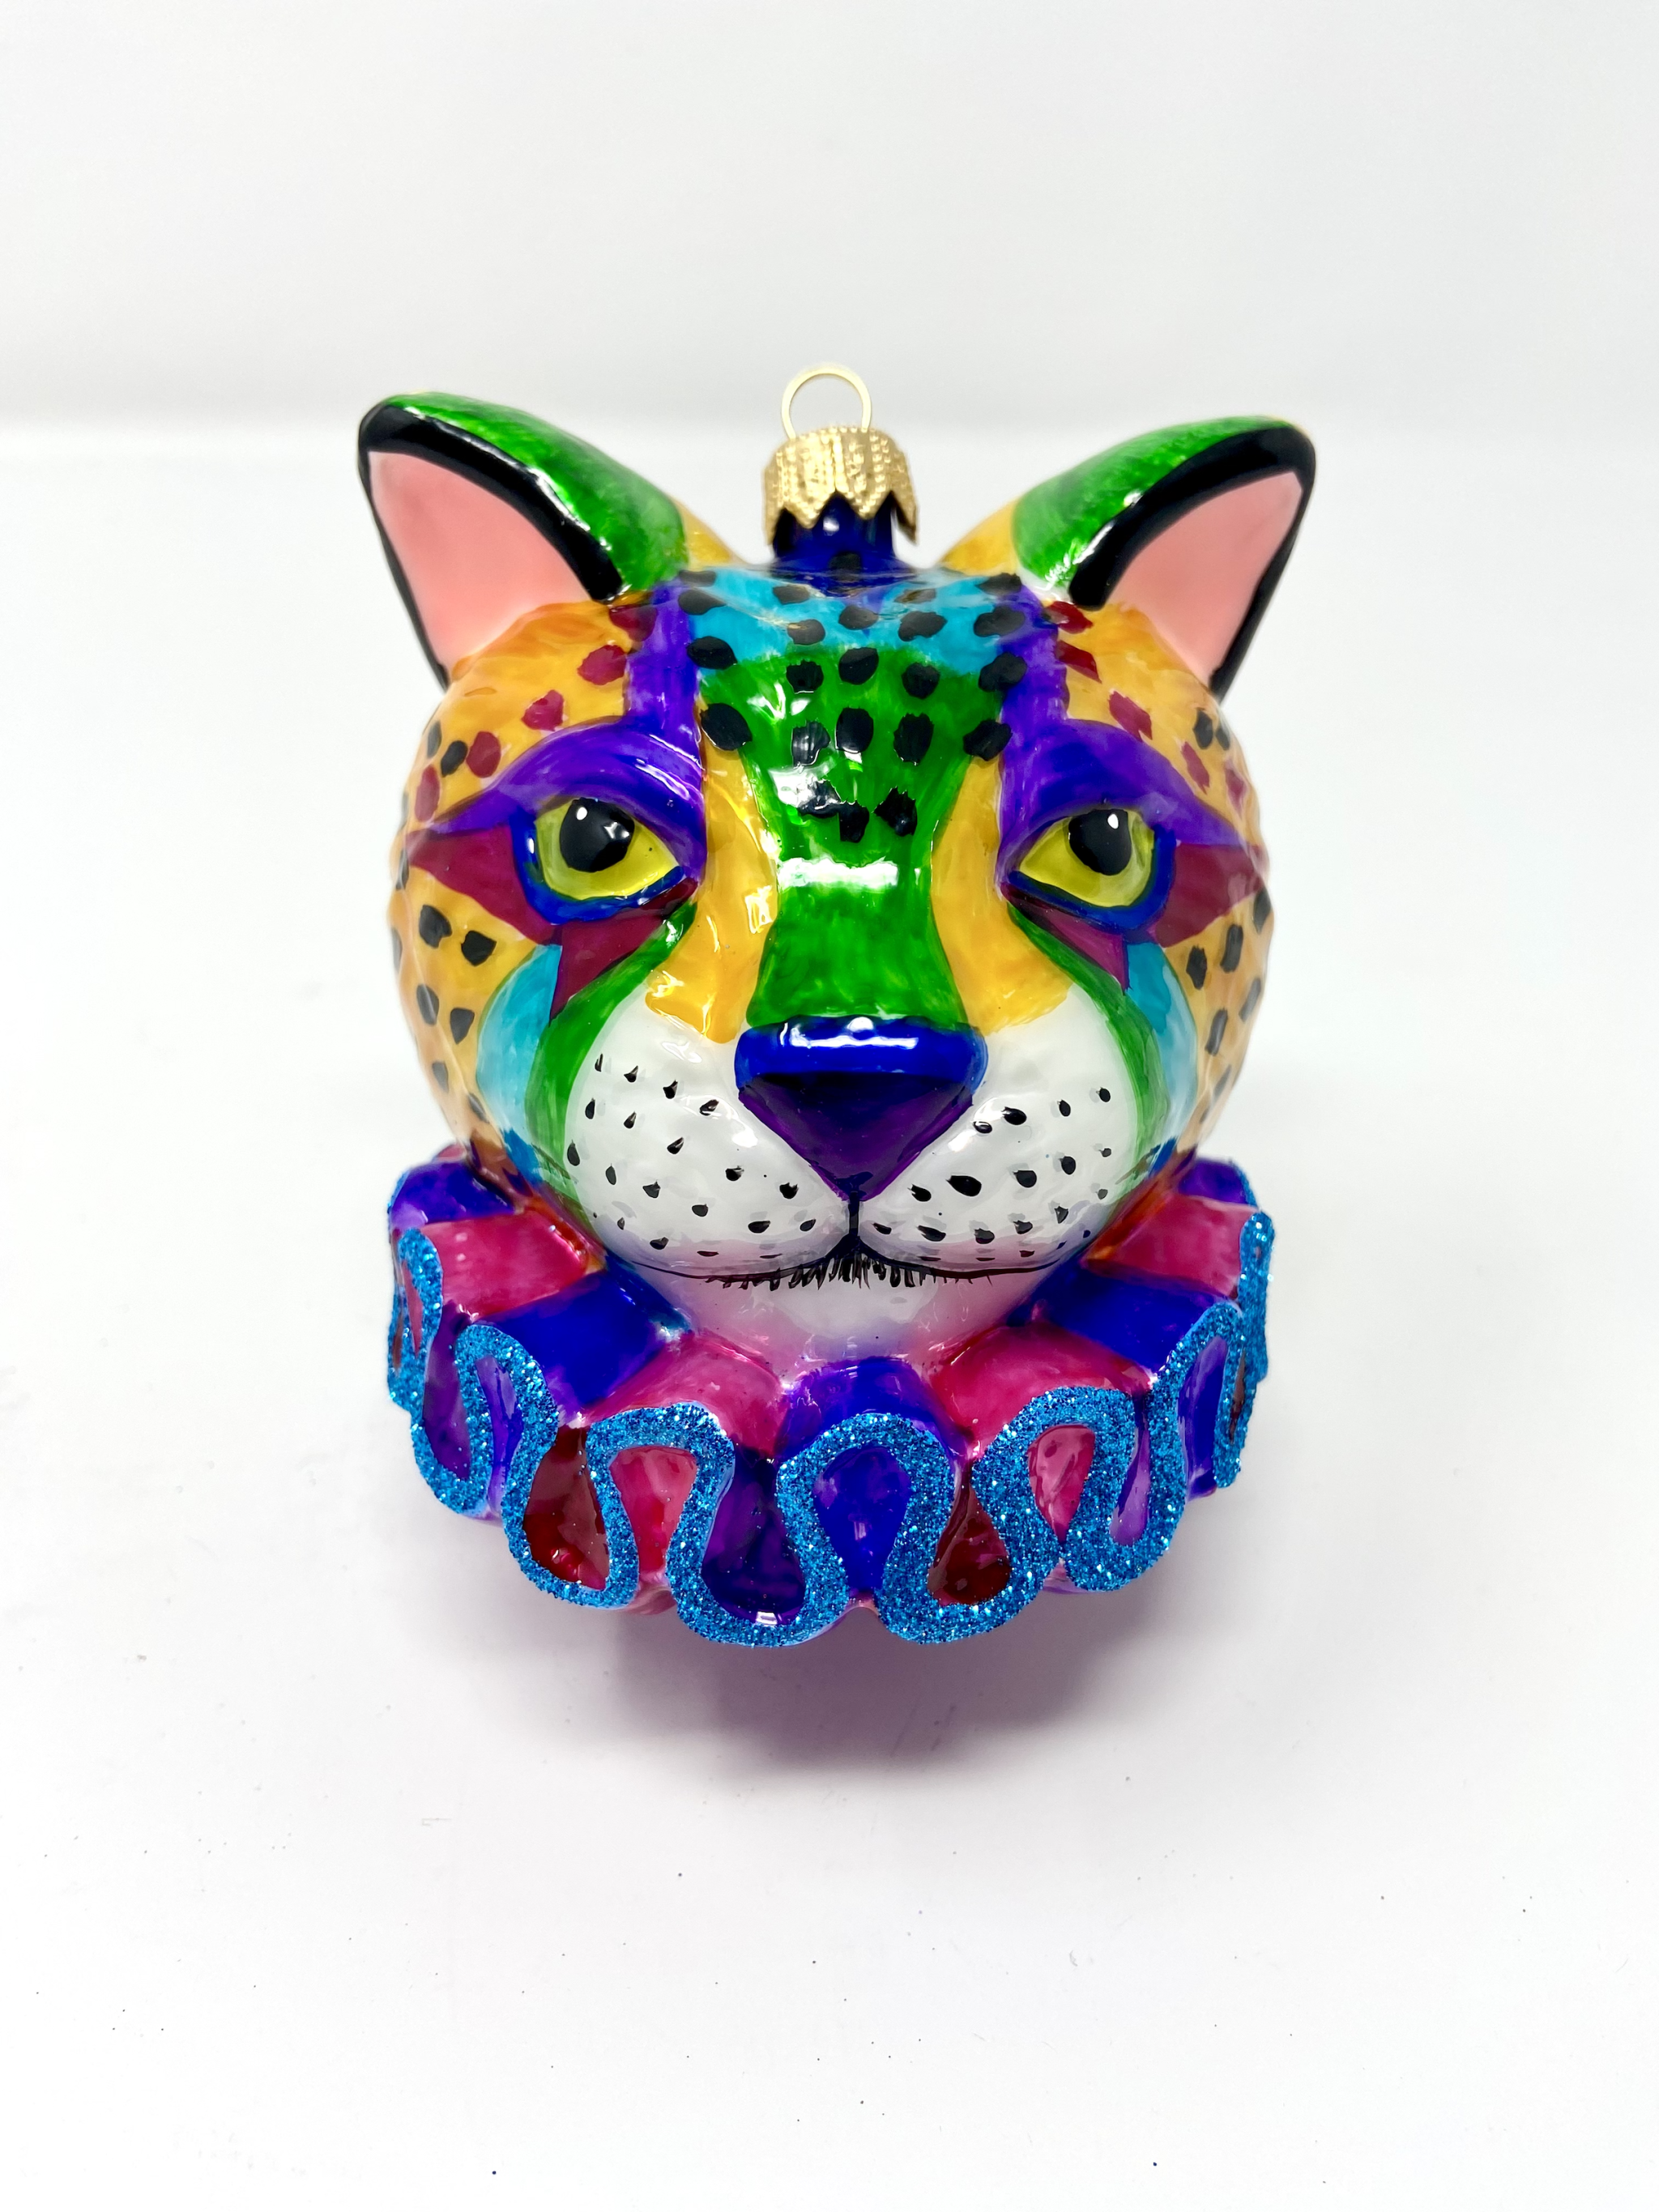 colorful rainbow cheetah glass ornament with dayglo 1980s and 1990s color patterns